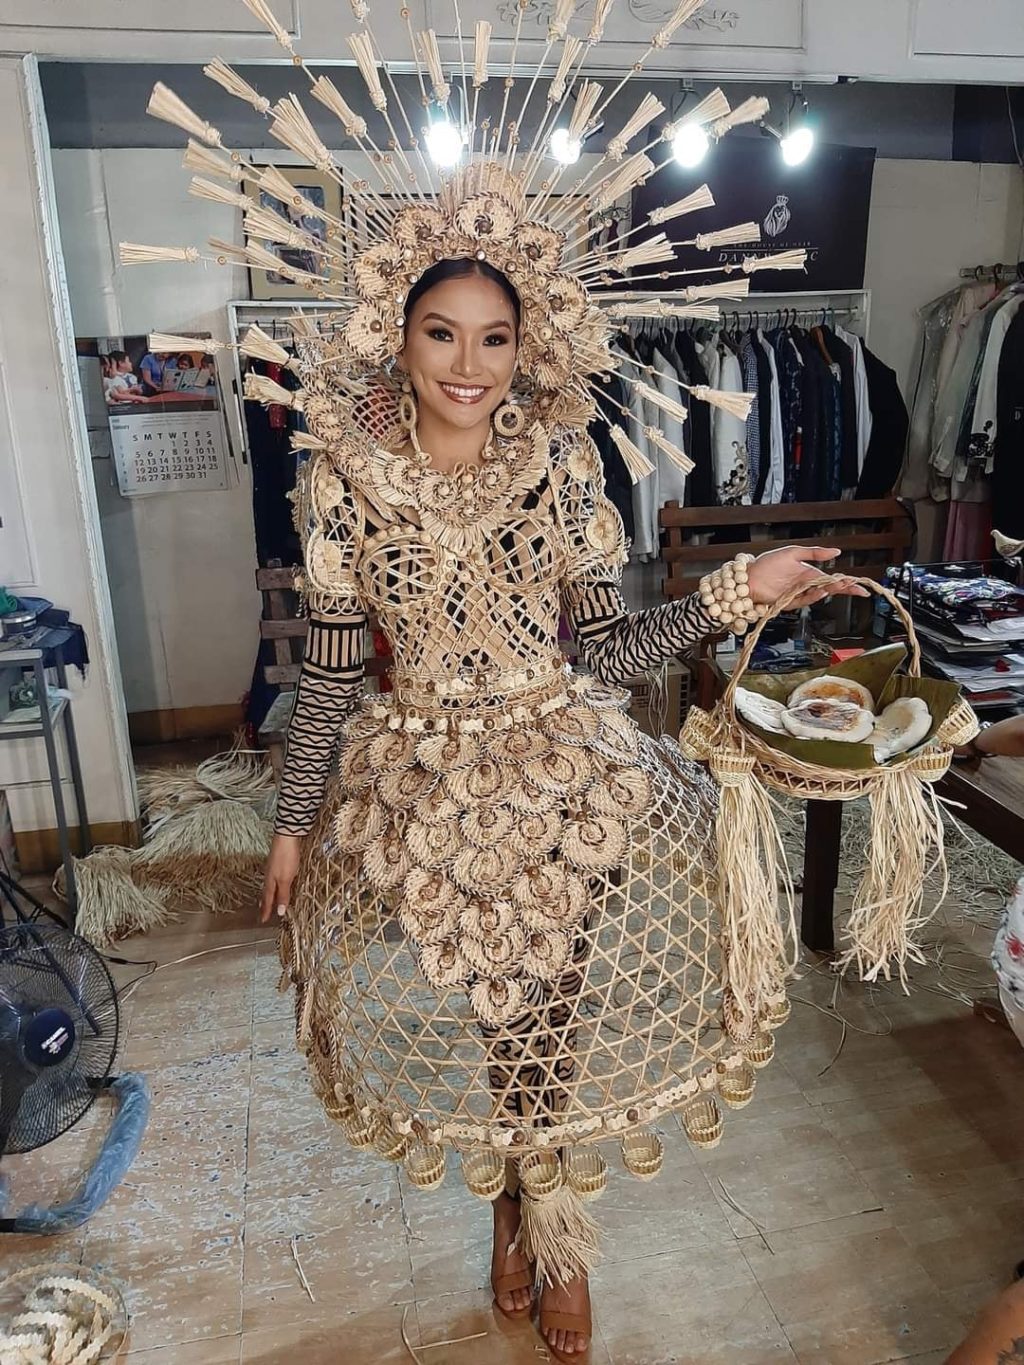 Miss Mandaue Lou Dominic Piczon wins the Best in National Costume for the Miss Universe Philippines 2020 with her bibingka-inspired costume. | Photo courtesy of Danny Booc